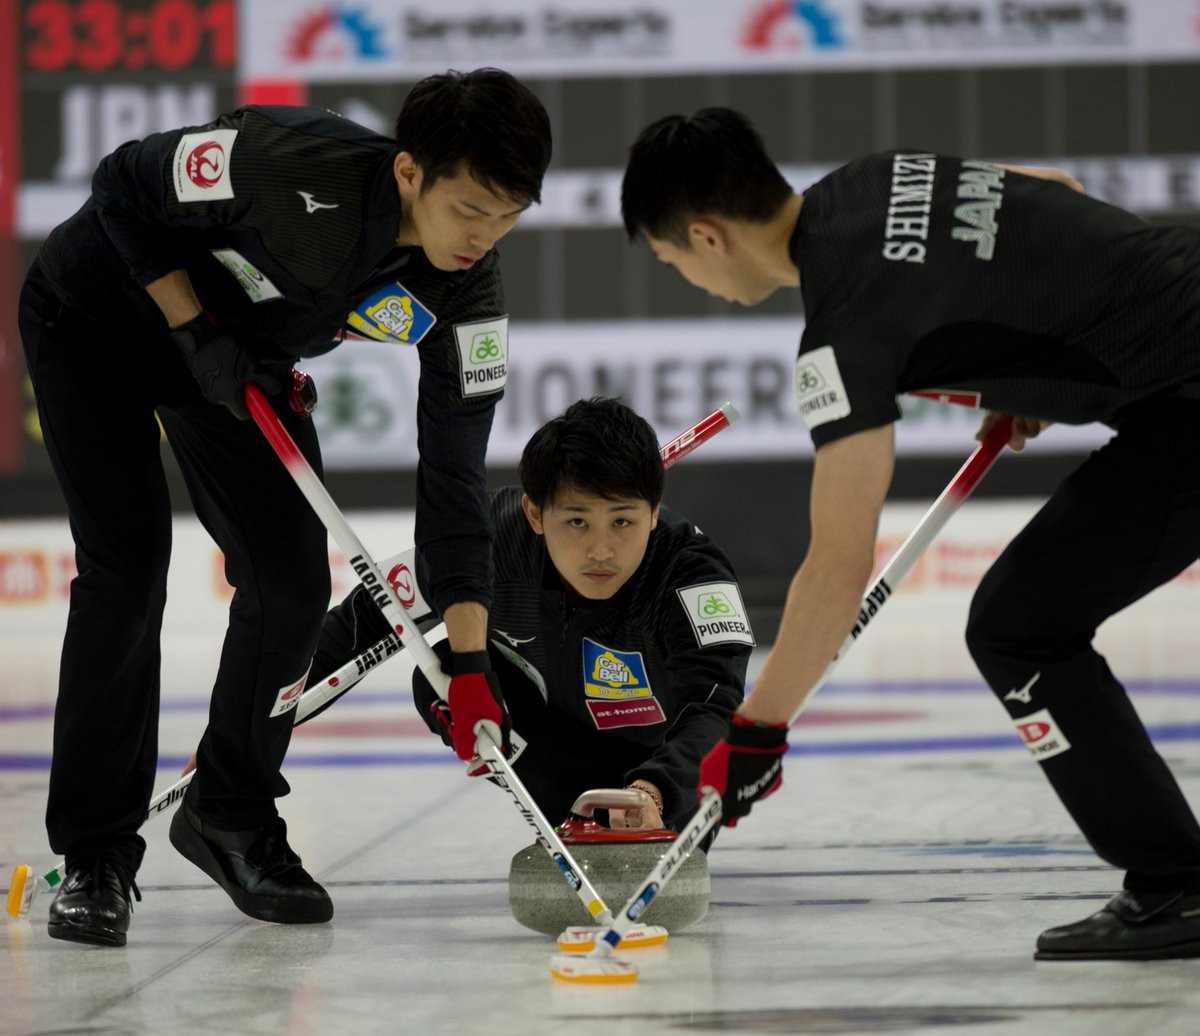 Japan beat South Korea and Germany to move into a three-way tie on the leaderboard ©World Curling